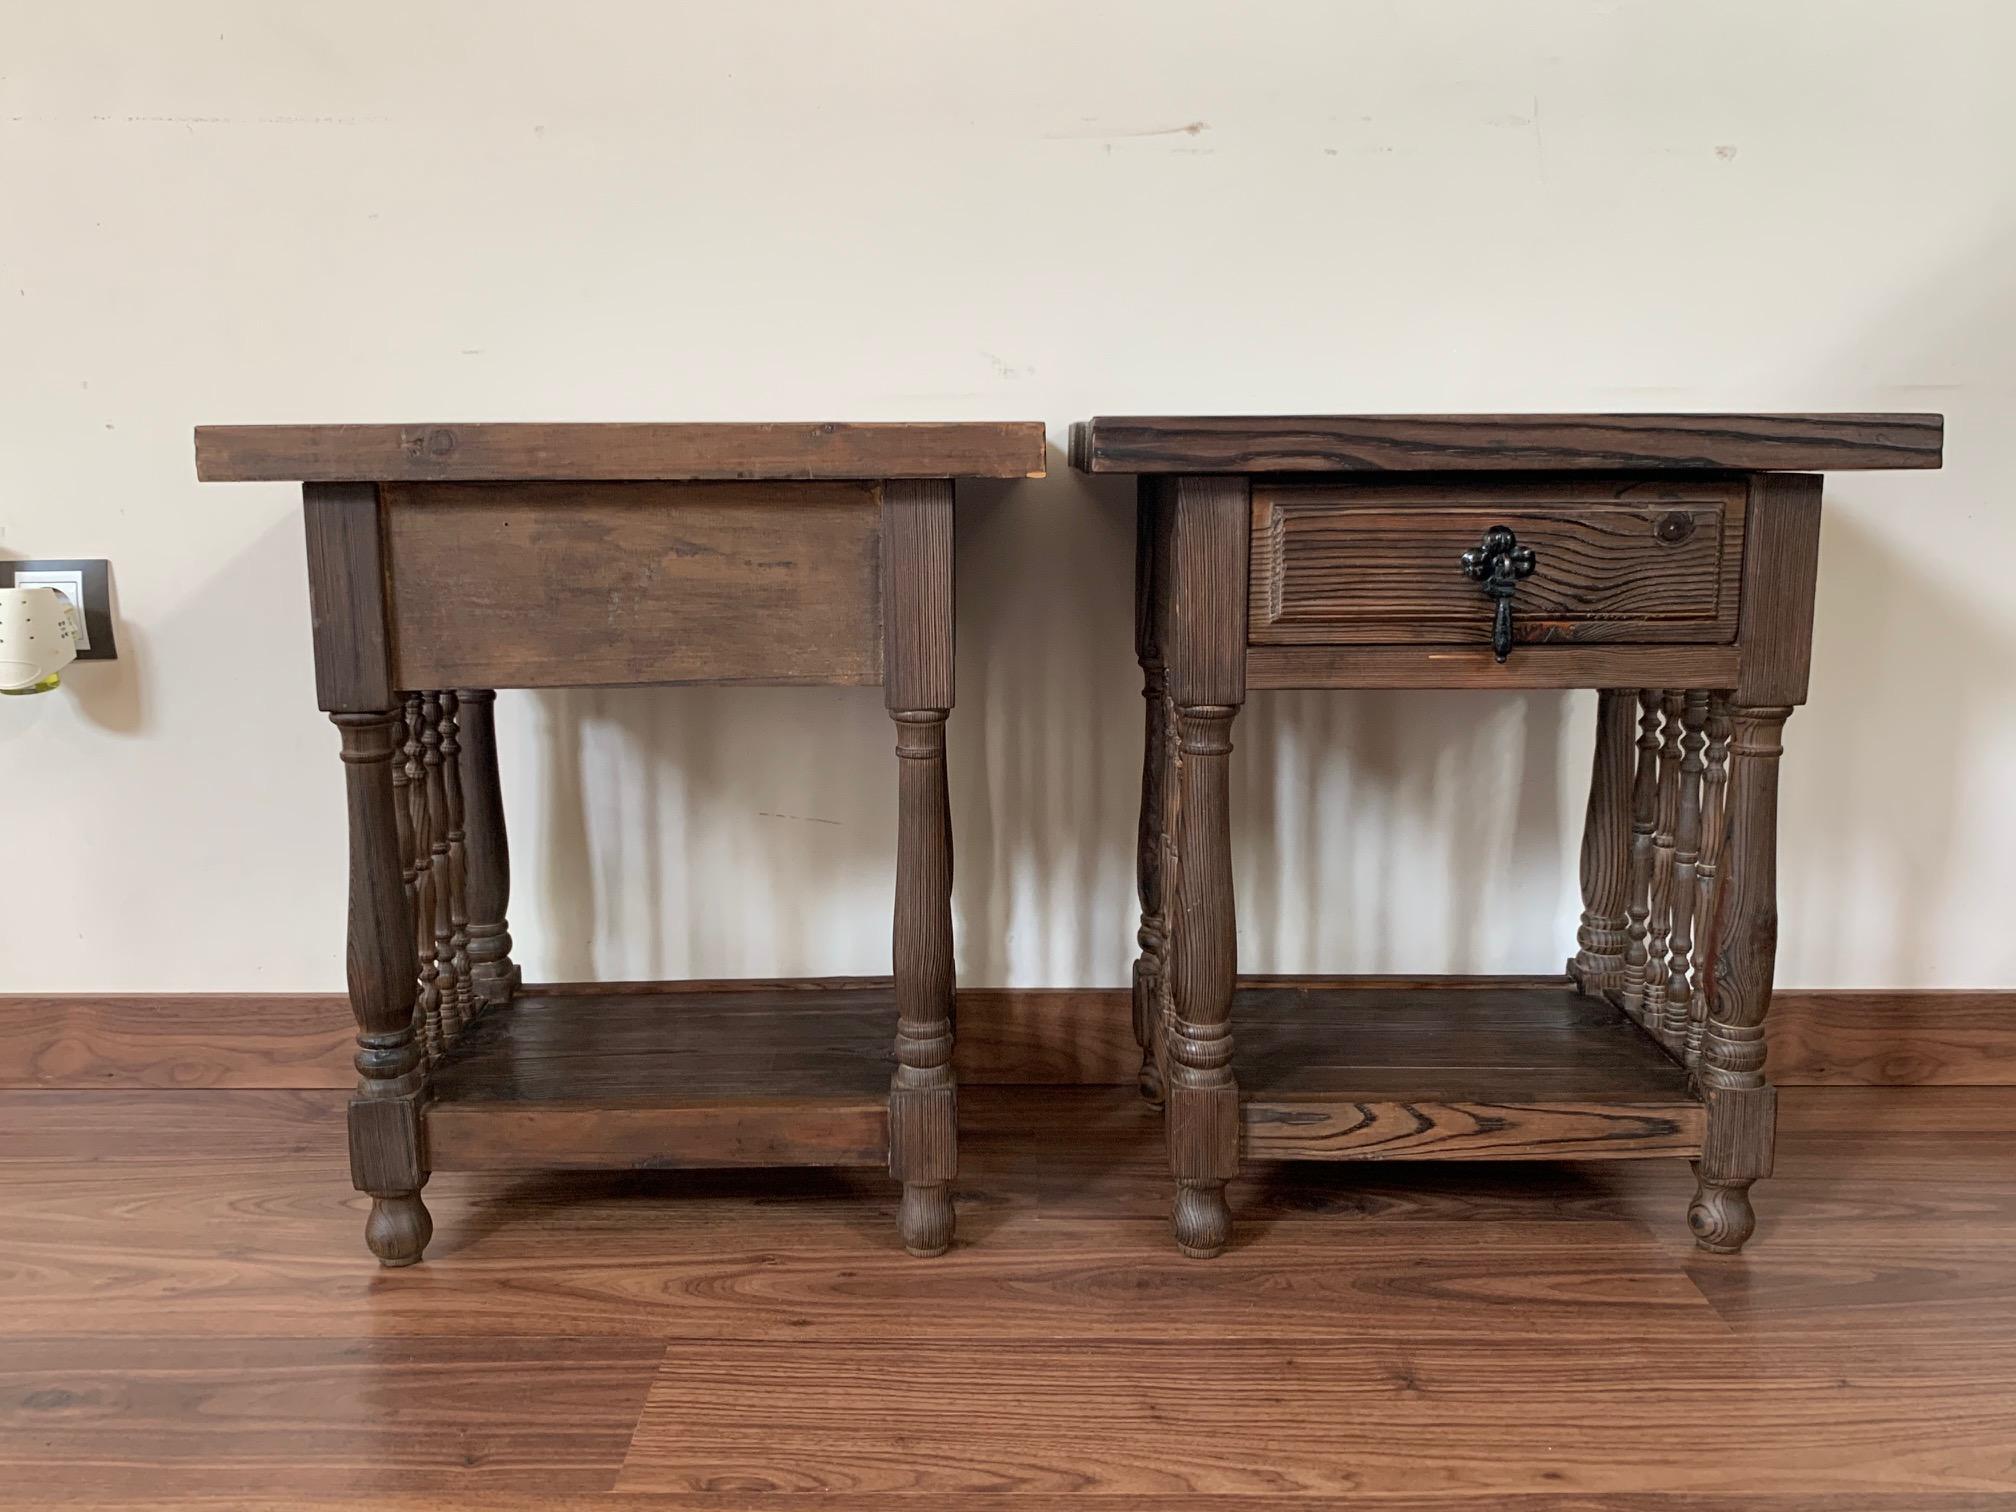 19th Century Pair of Catalan, Spanish Nightstands with Carved Bars, Drawer and Open Shelf